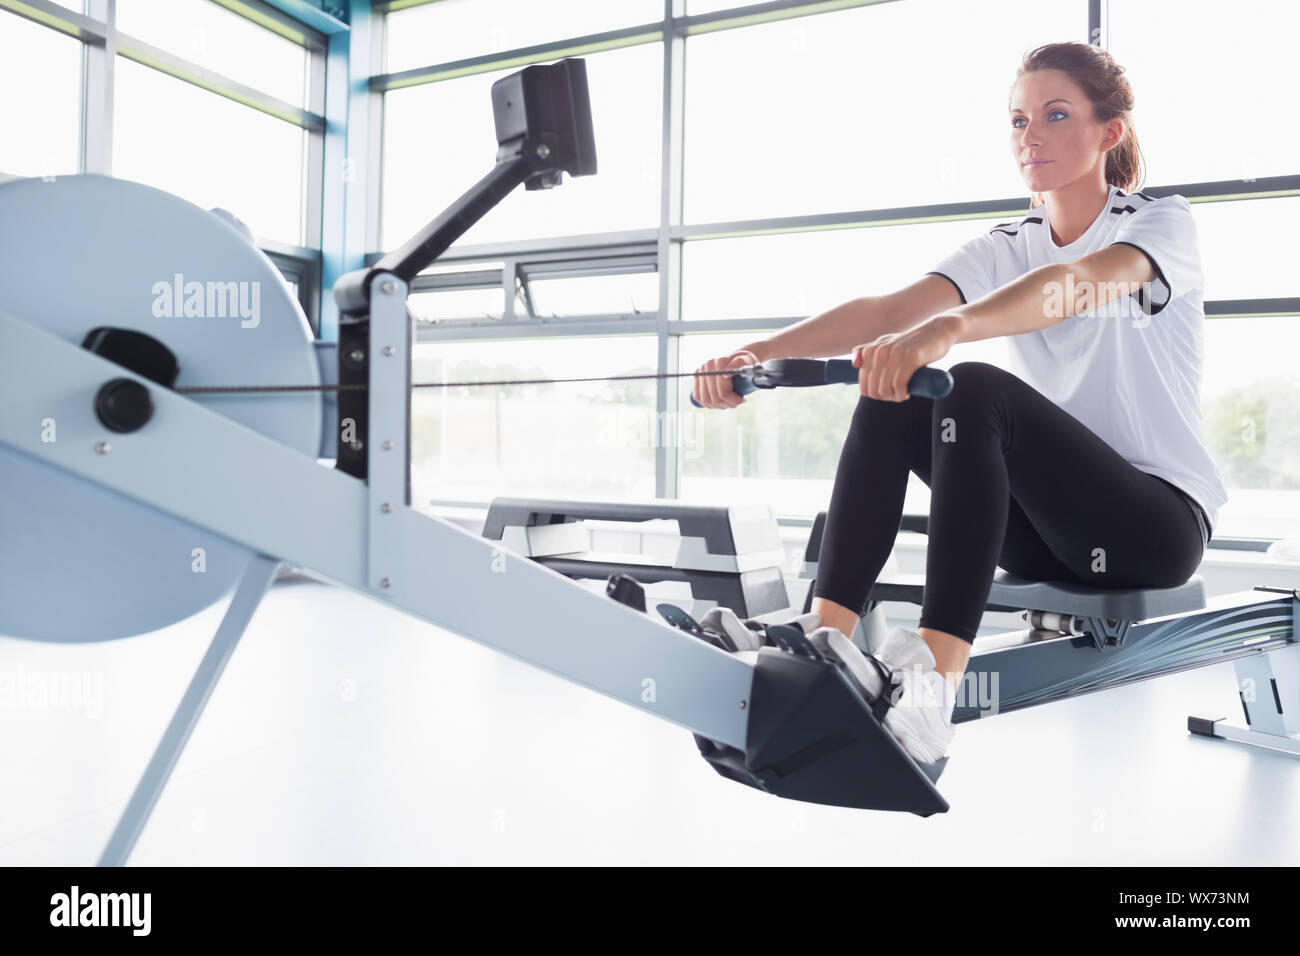 Concetrating woman training on row machine in gym Stock Photo